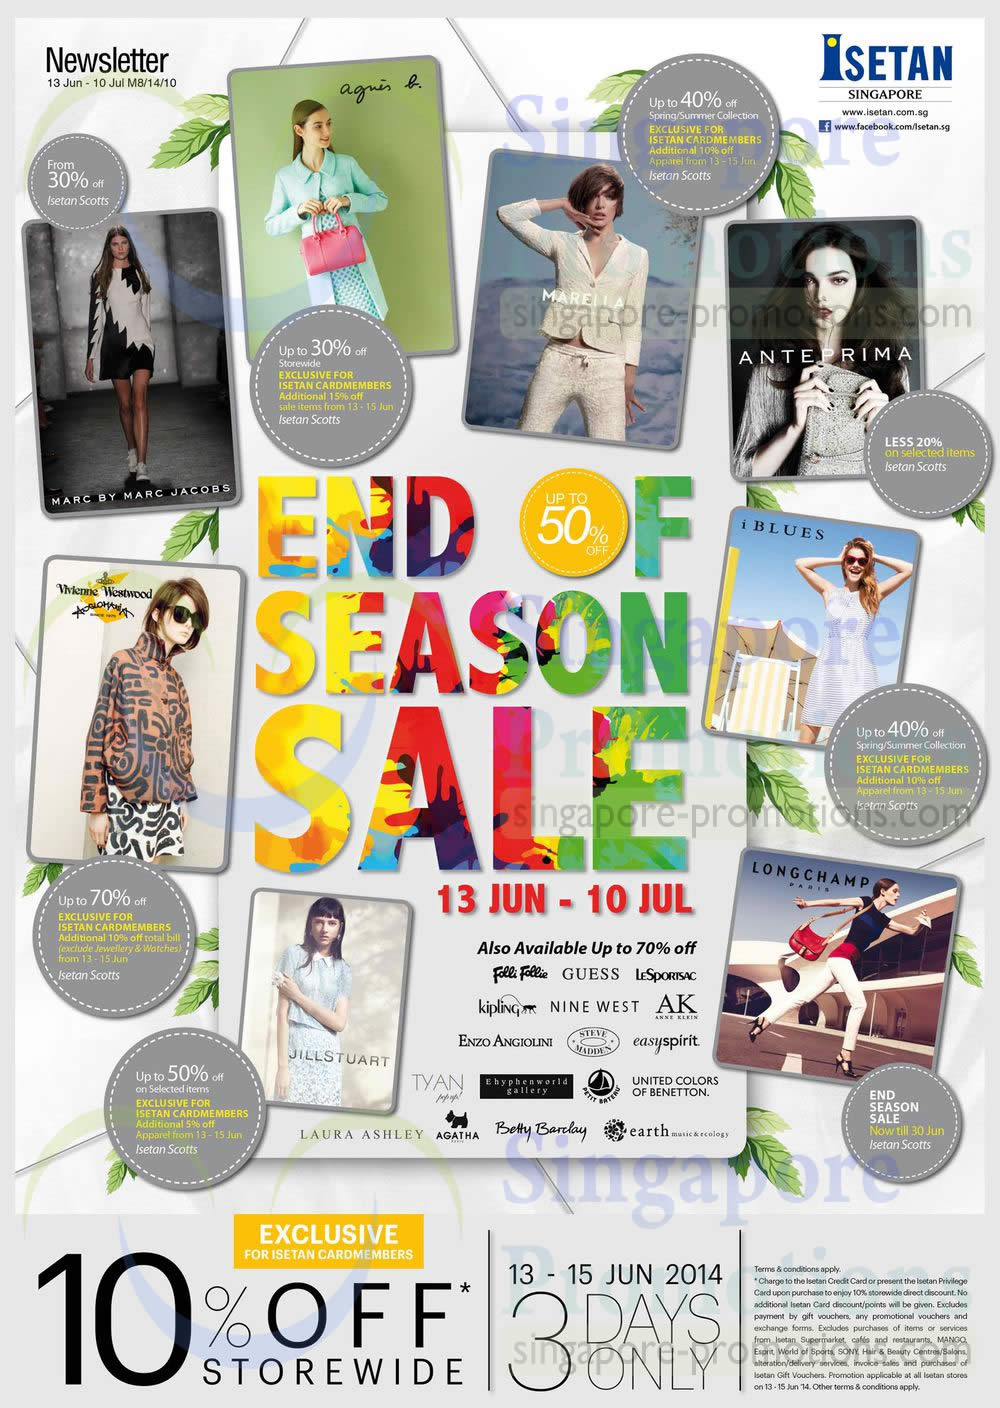 Featured image for Isetan Up To 50% Off End of Season Sale 13 Jun - 10 Jul 2014